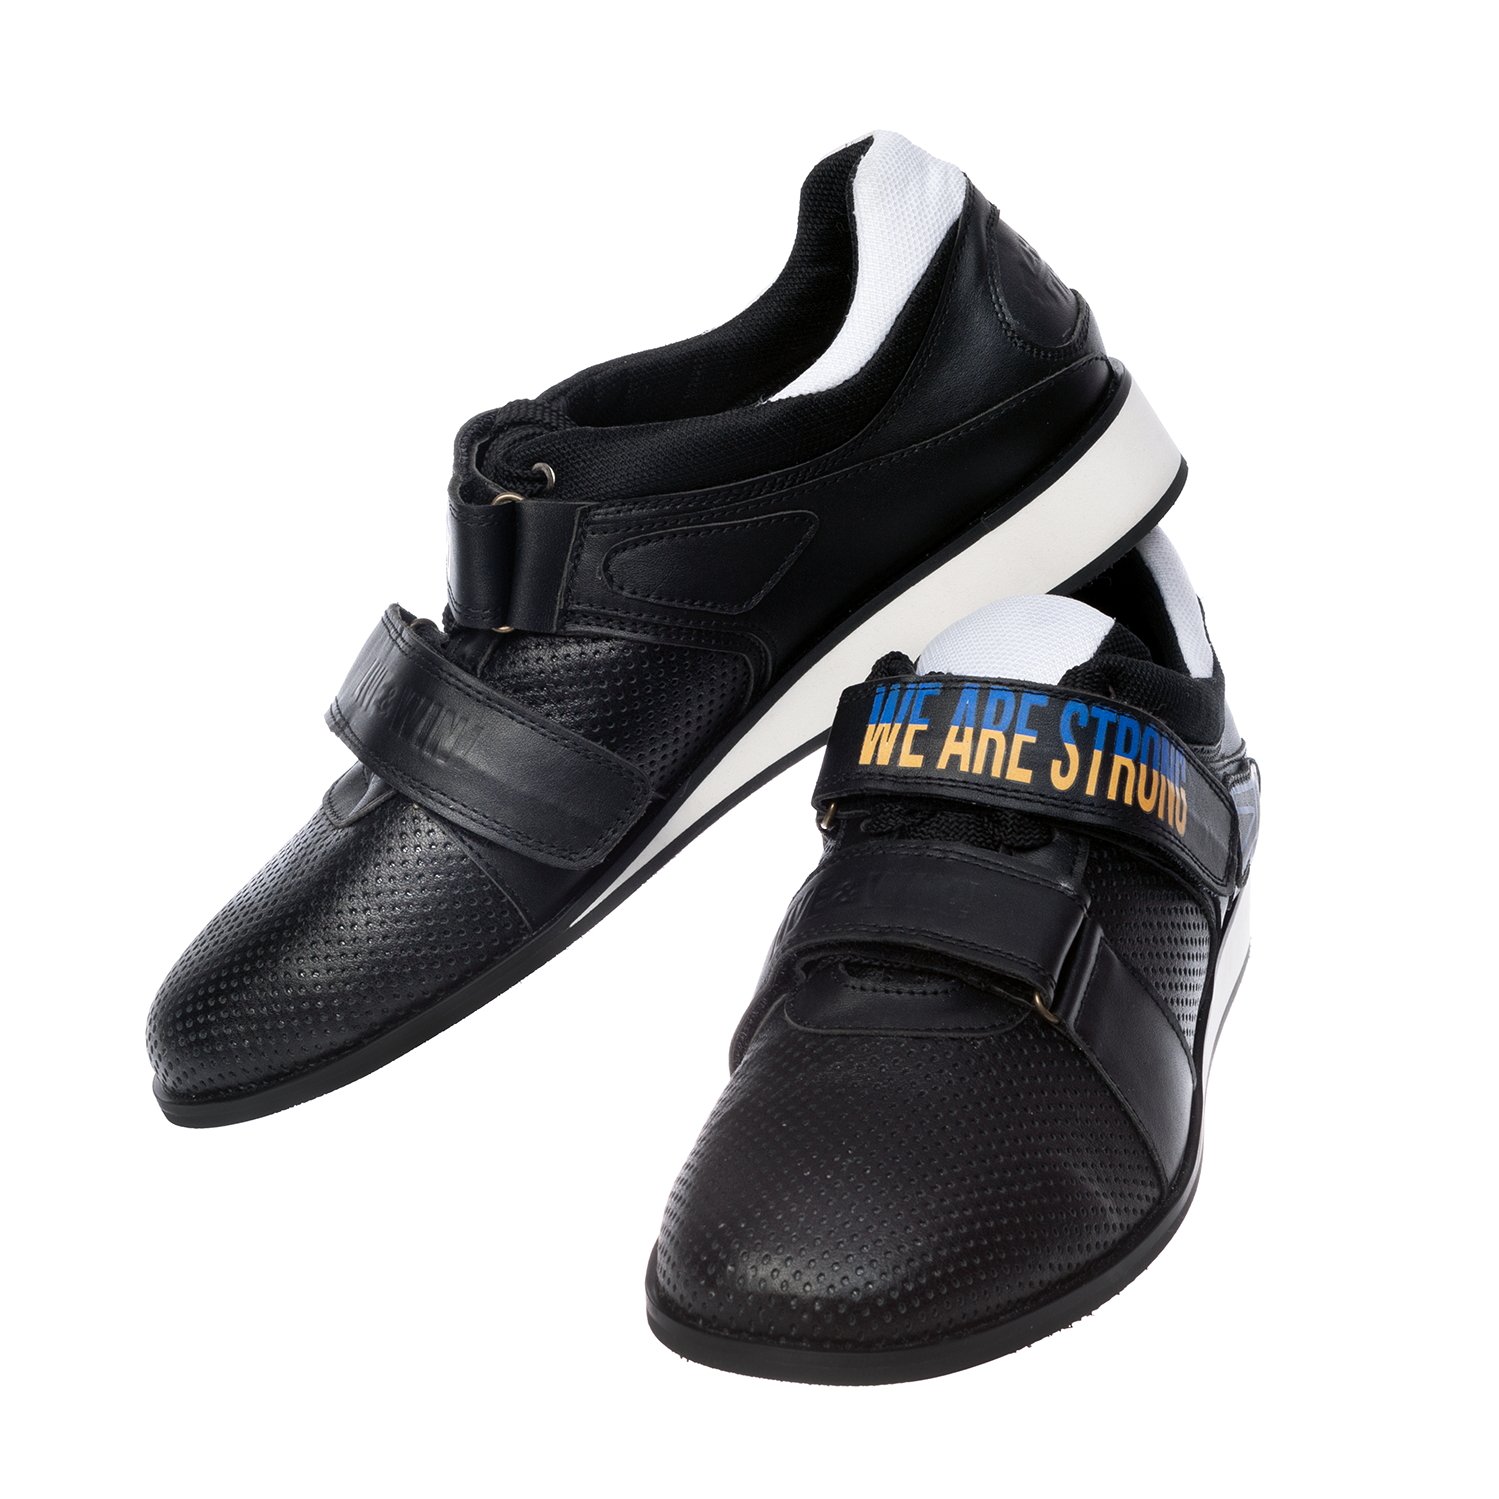 Weightlifting shoes  We are strong, black, size 38 (UKR)